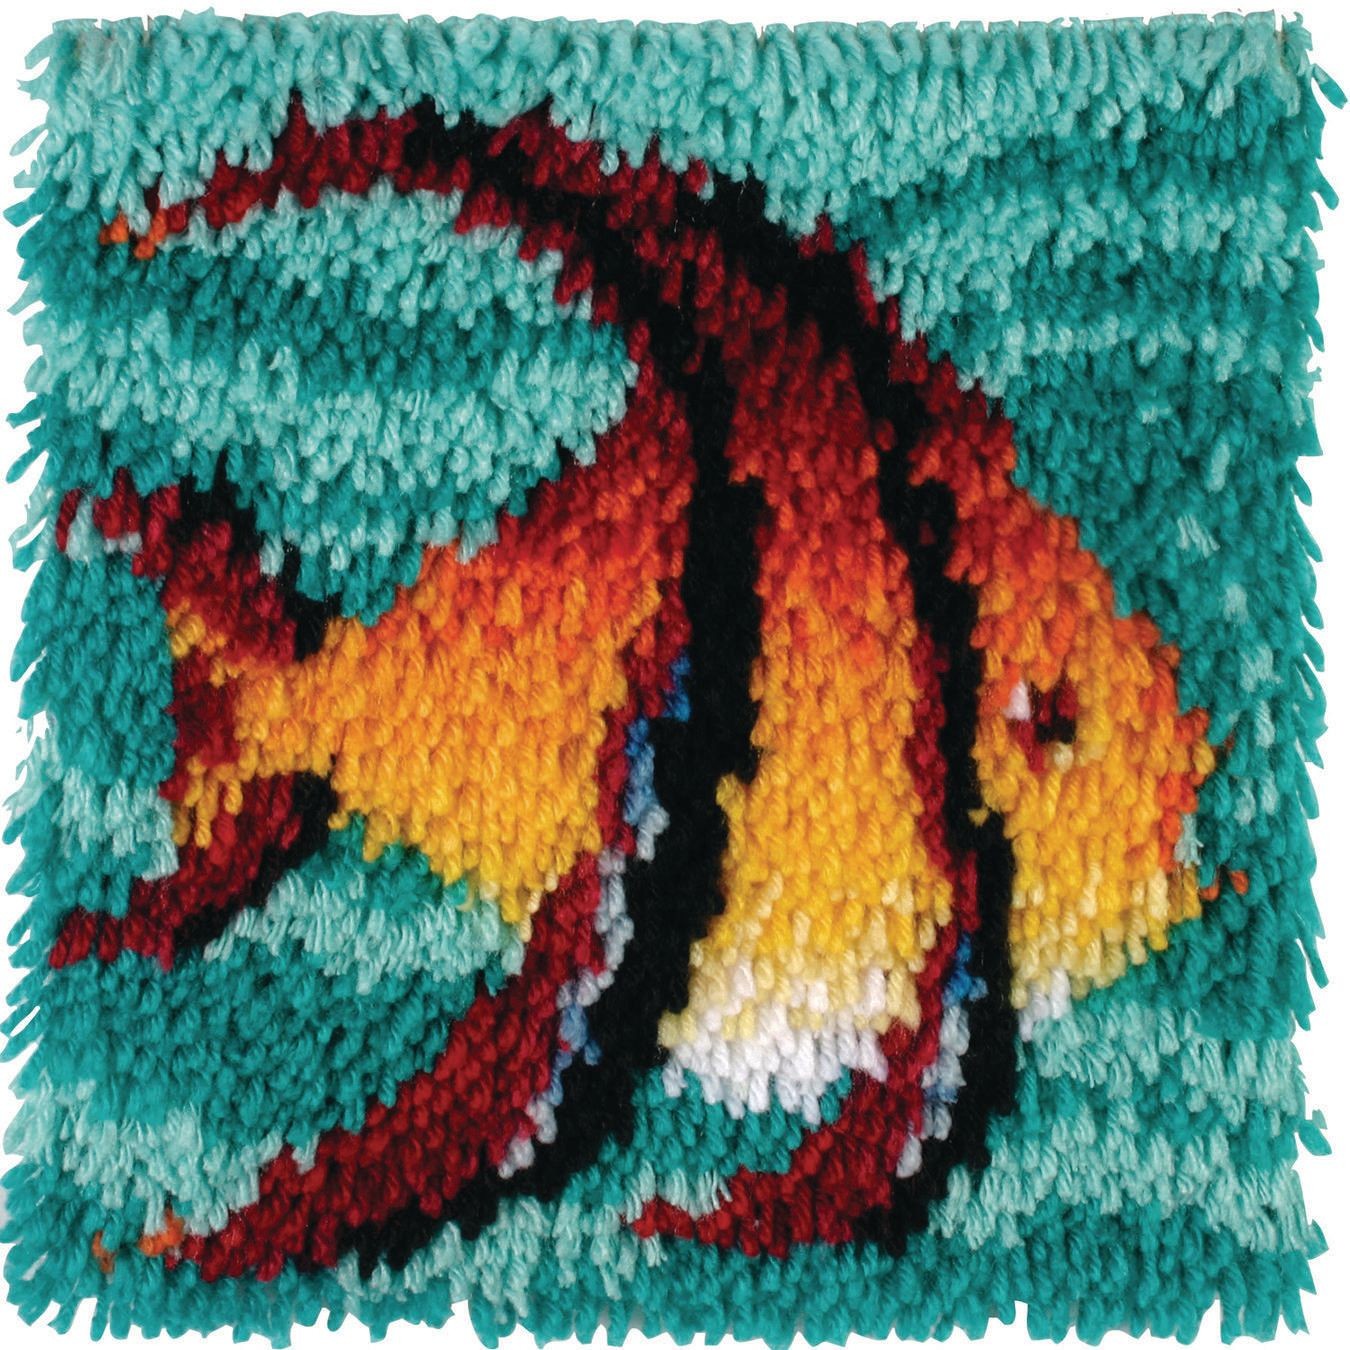 Fishing Fish Latch Hook Rug Kits with Printed Patterns for Adults and  Starter DIY Embroidery Latch Hook Rug Sofa Seat Cushion Crocheting Kits  Tapestry Door Mat Crochet Yarn Kits 52X38CM : 